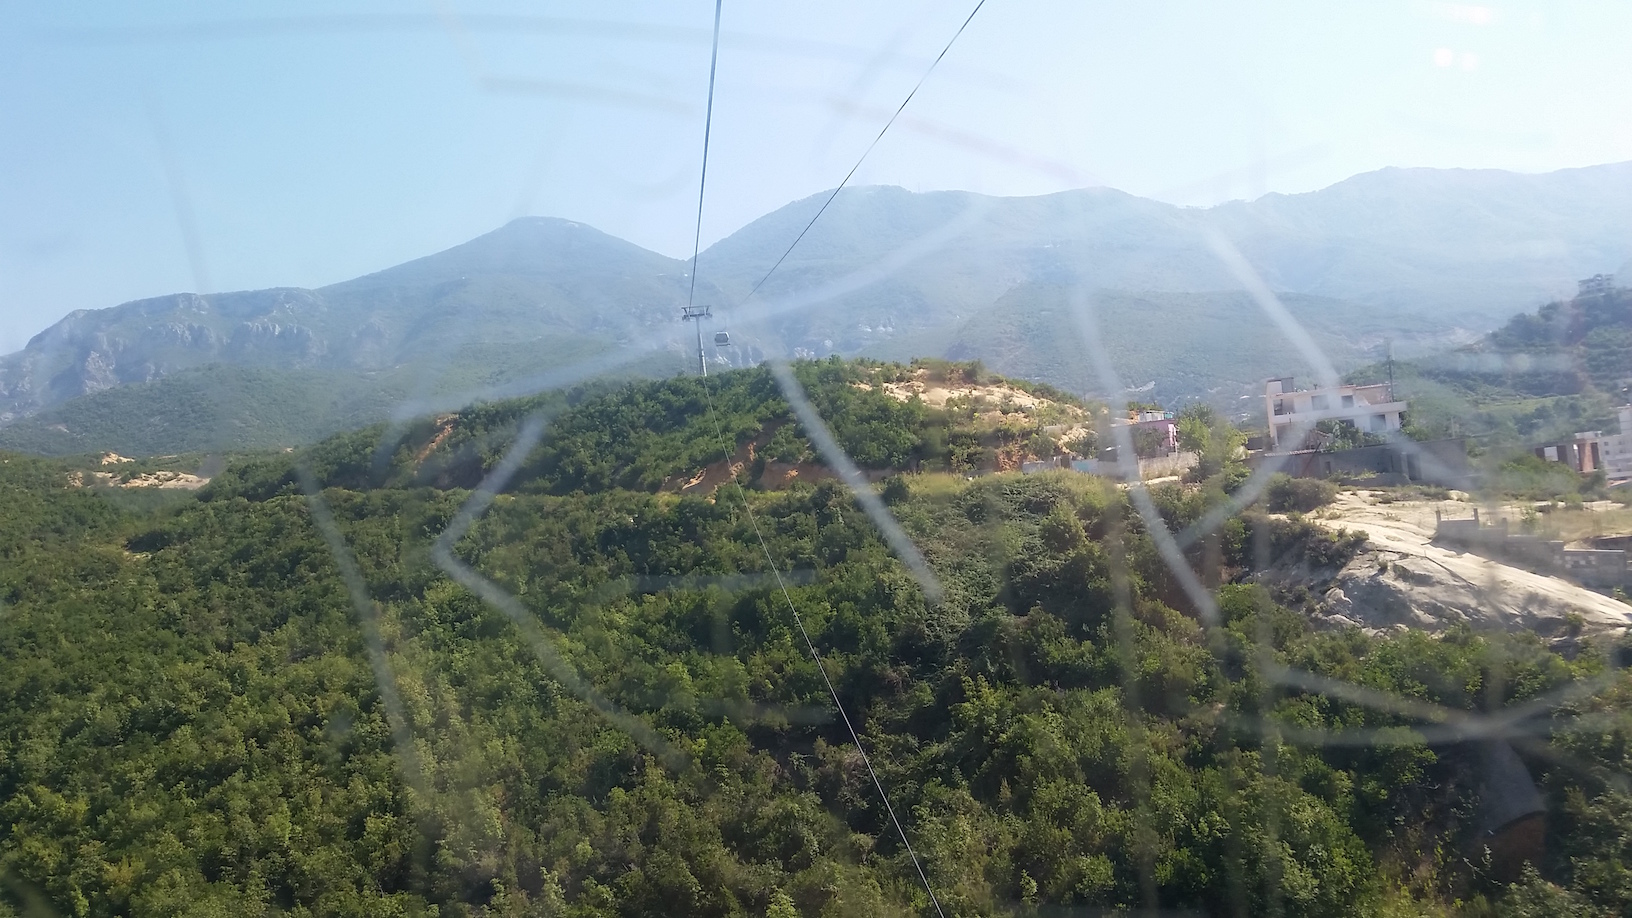 View from the cable car, scratched glass and all